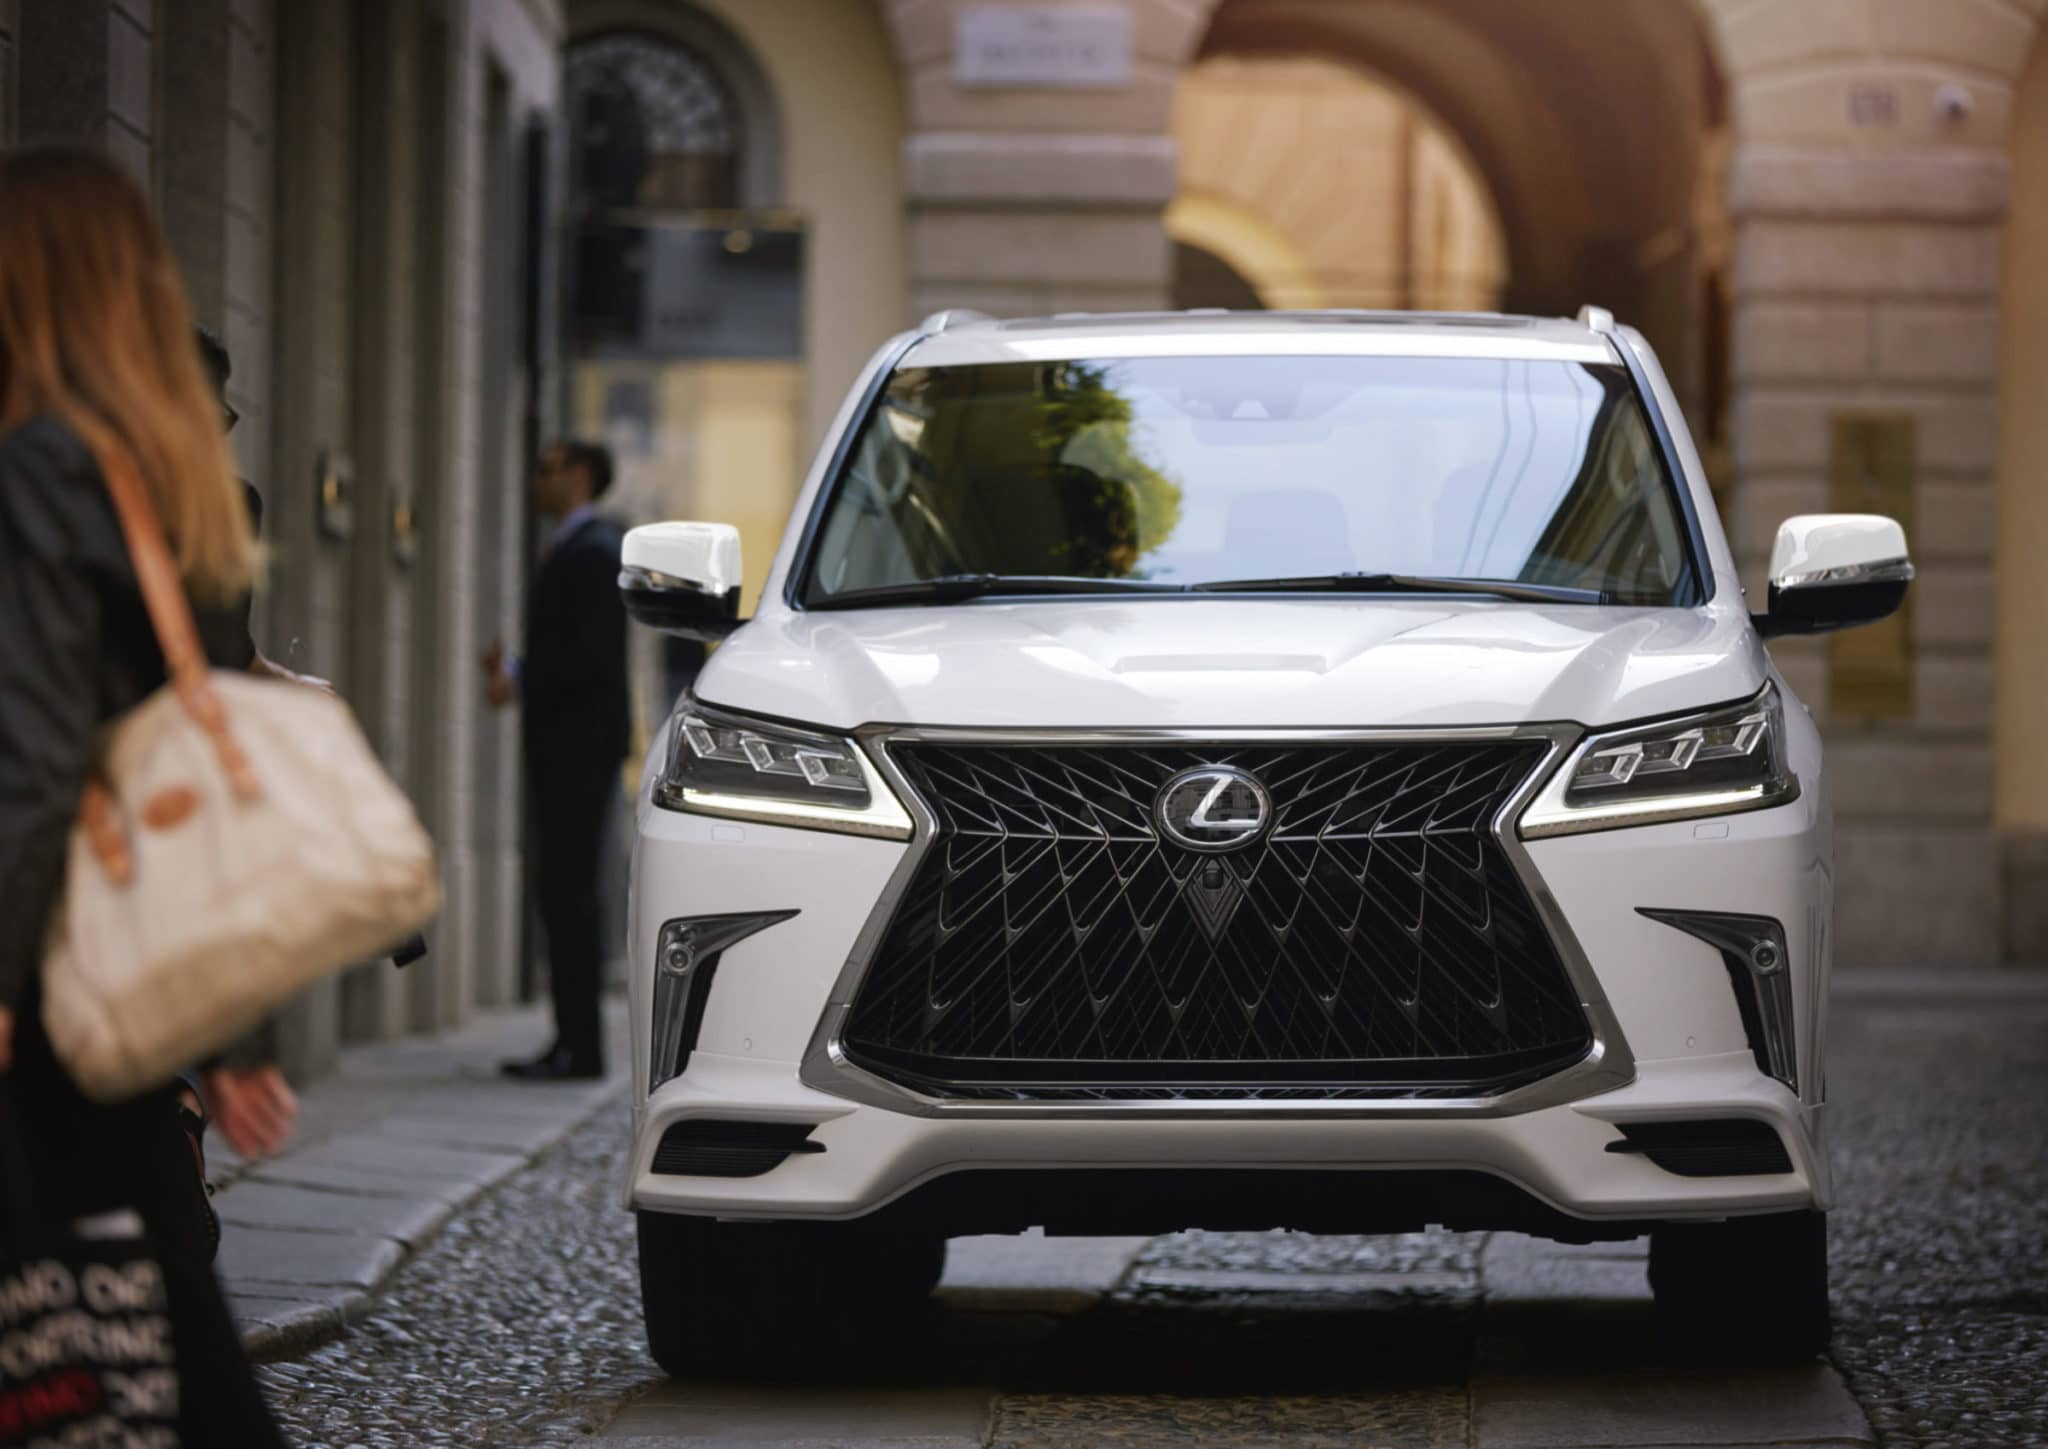 My Opinion: The Lexus LX 570 is the Best Family 2020 SUV